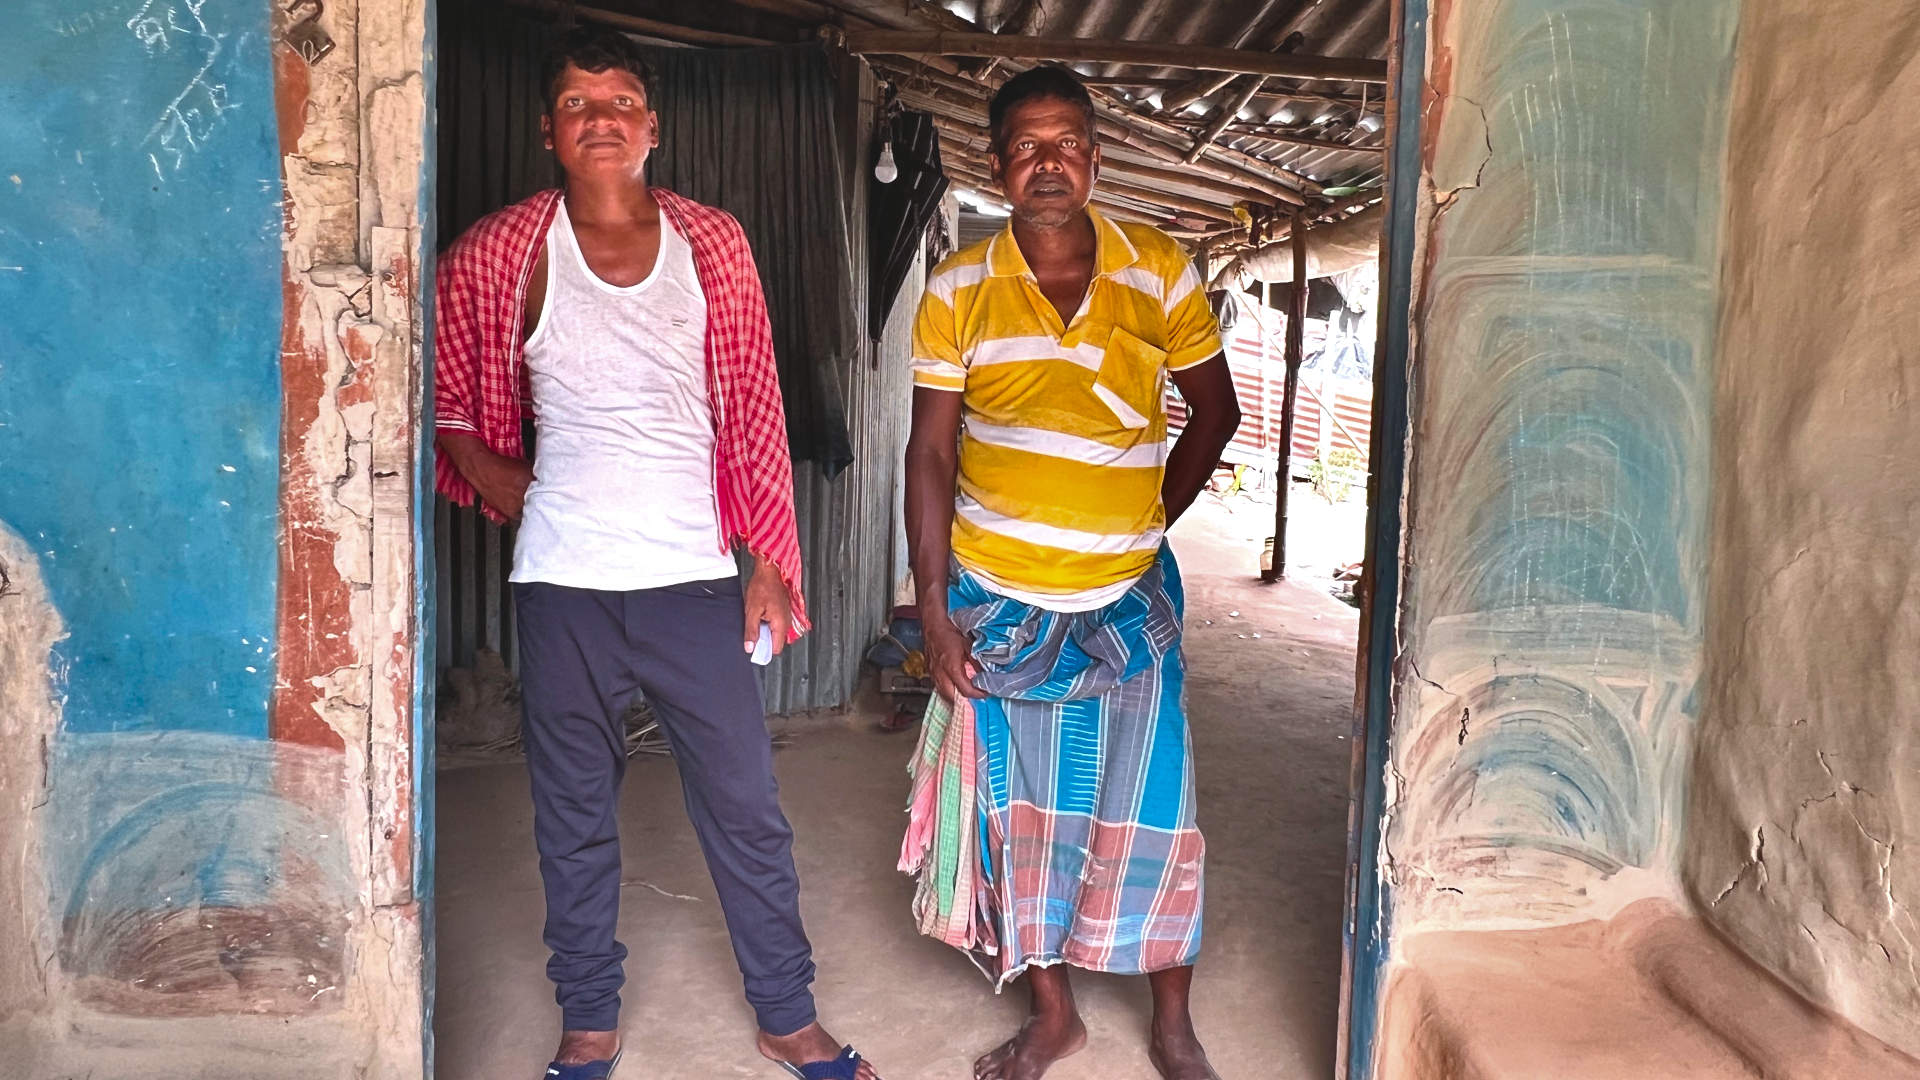 Sanjeet Pahan (left) and his brother (right) at Pahan’s home in a village in West Bengal, India. Pahan has an extreme case of post-kala-azar dermal leishmaniasis.